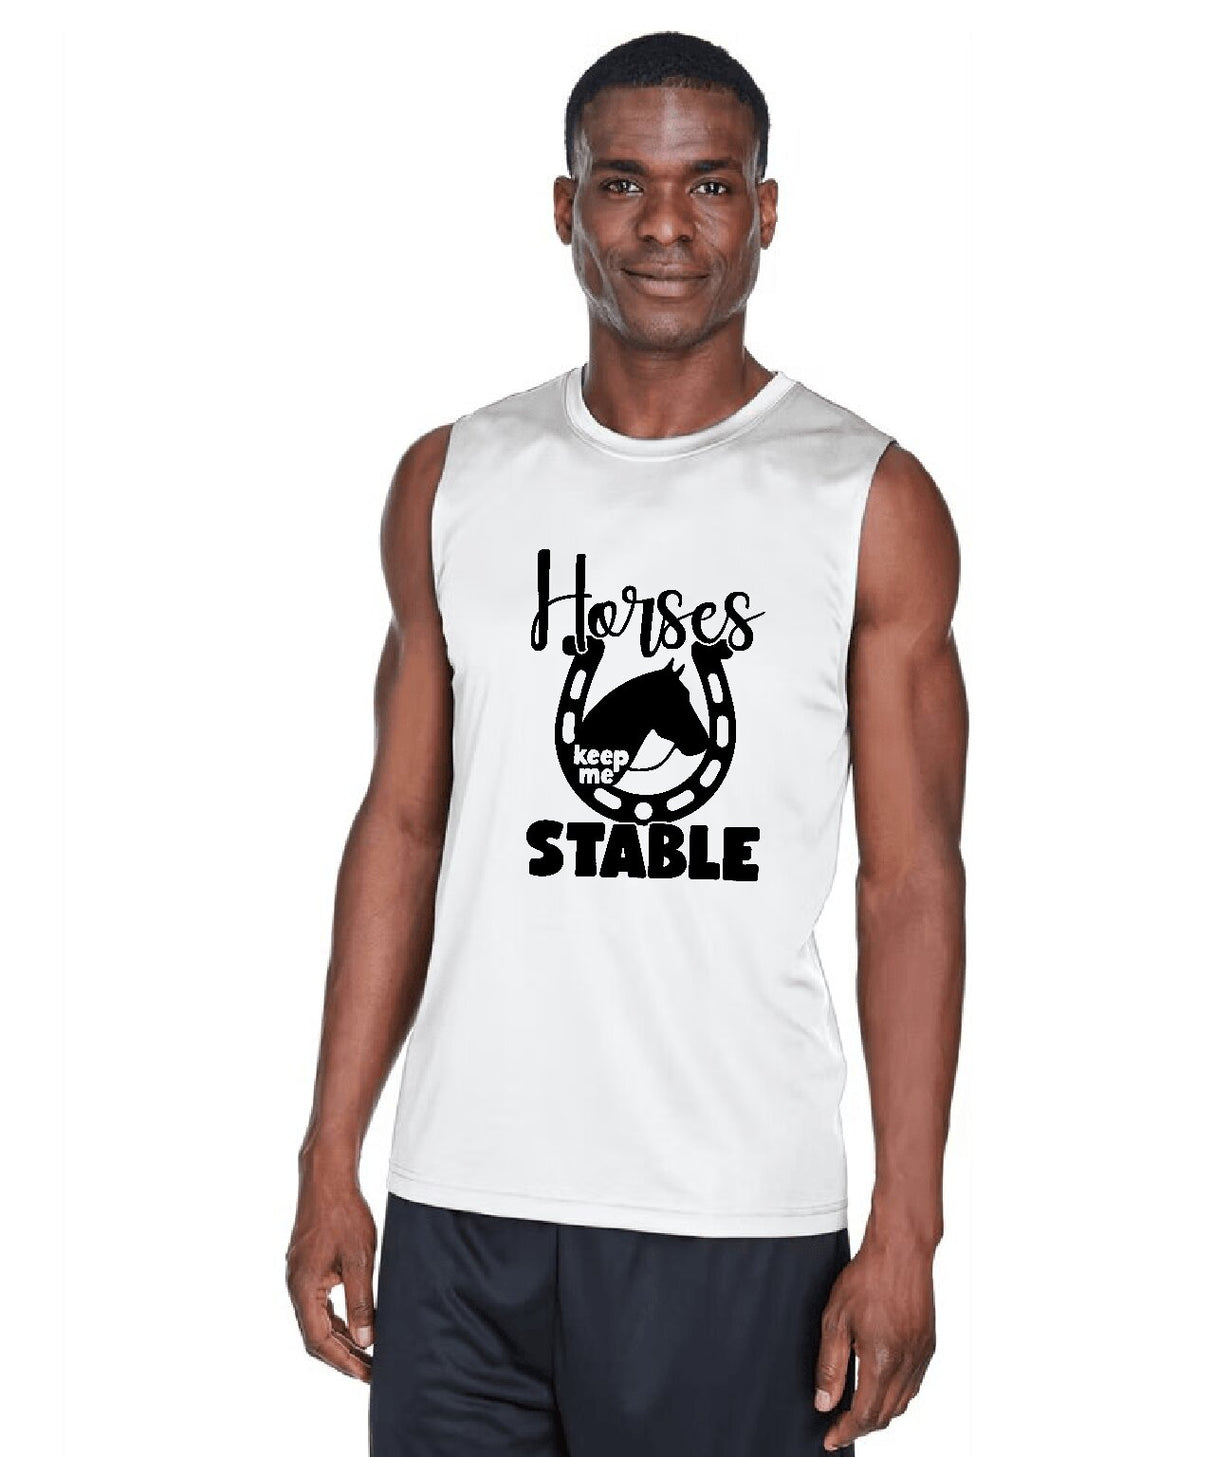 Horses Keep Me Stable Design 2 - Tank Top